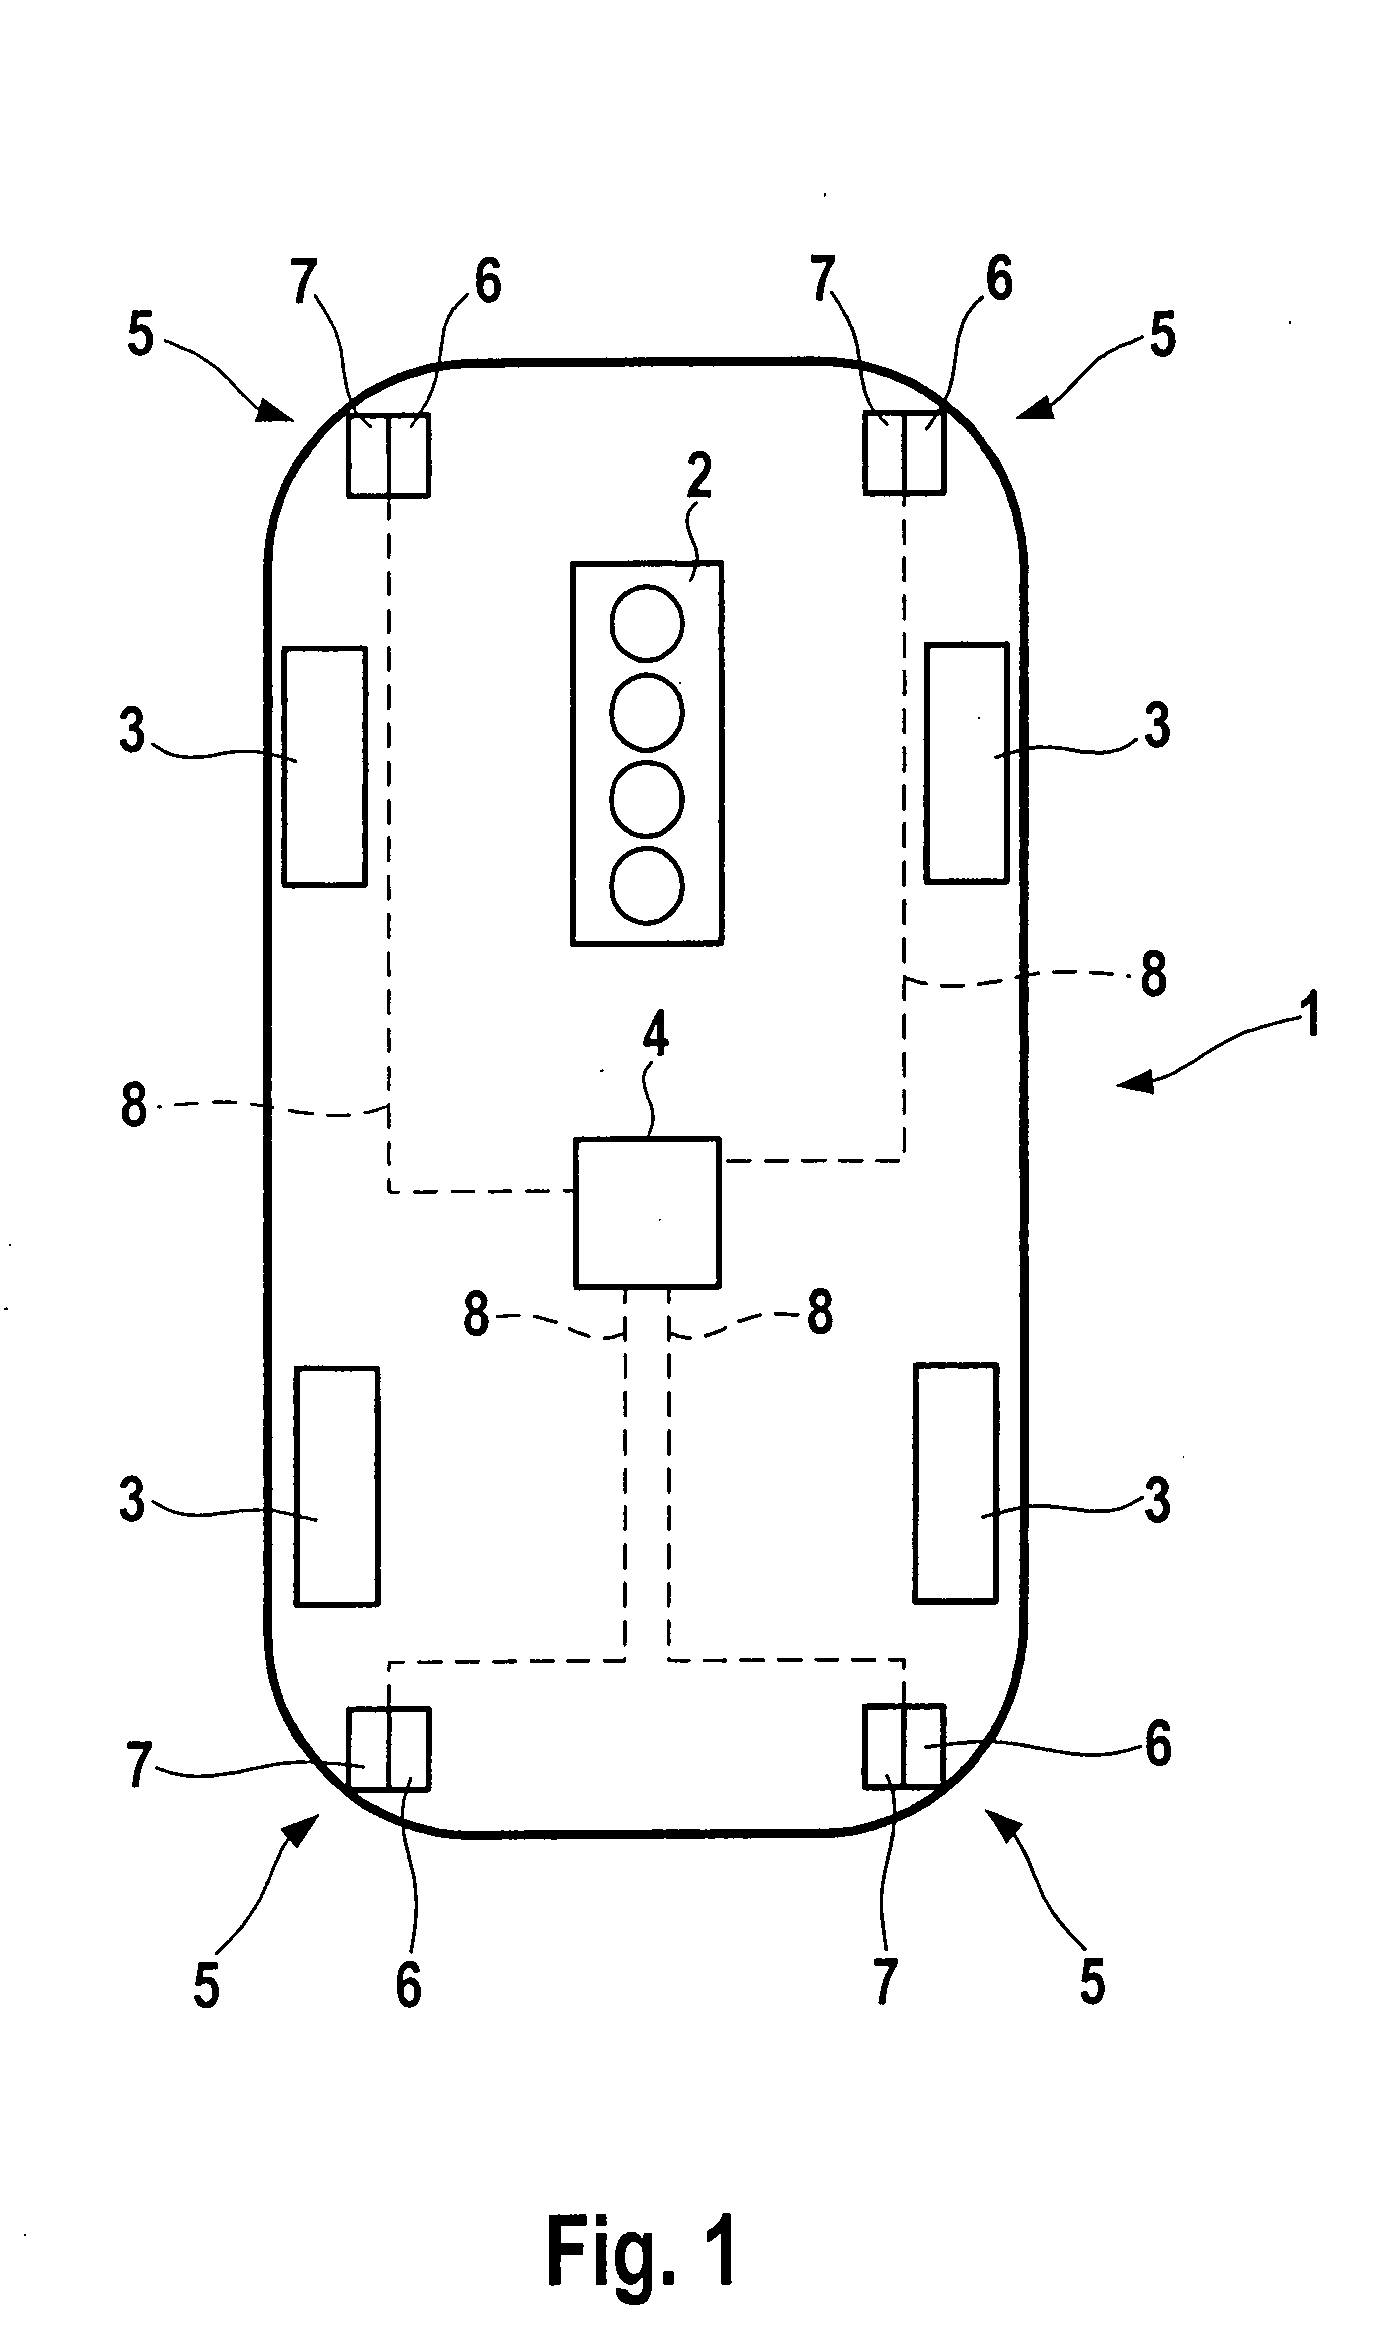 Method for diagnosing an internal combustion engine in a motor vehicle